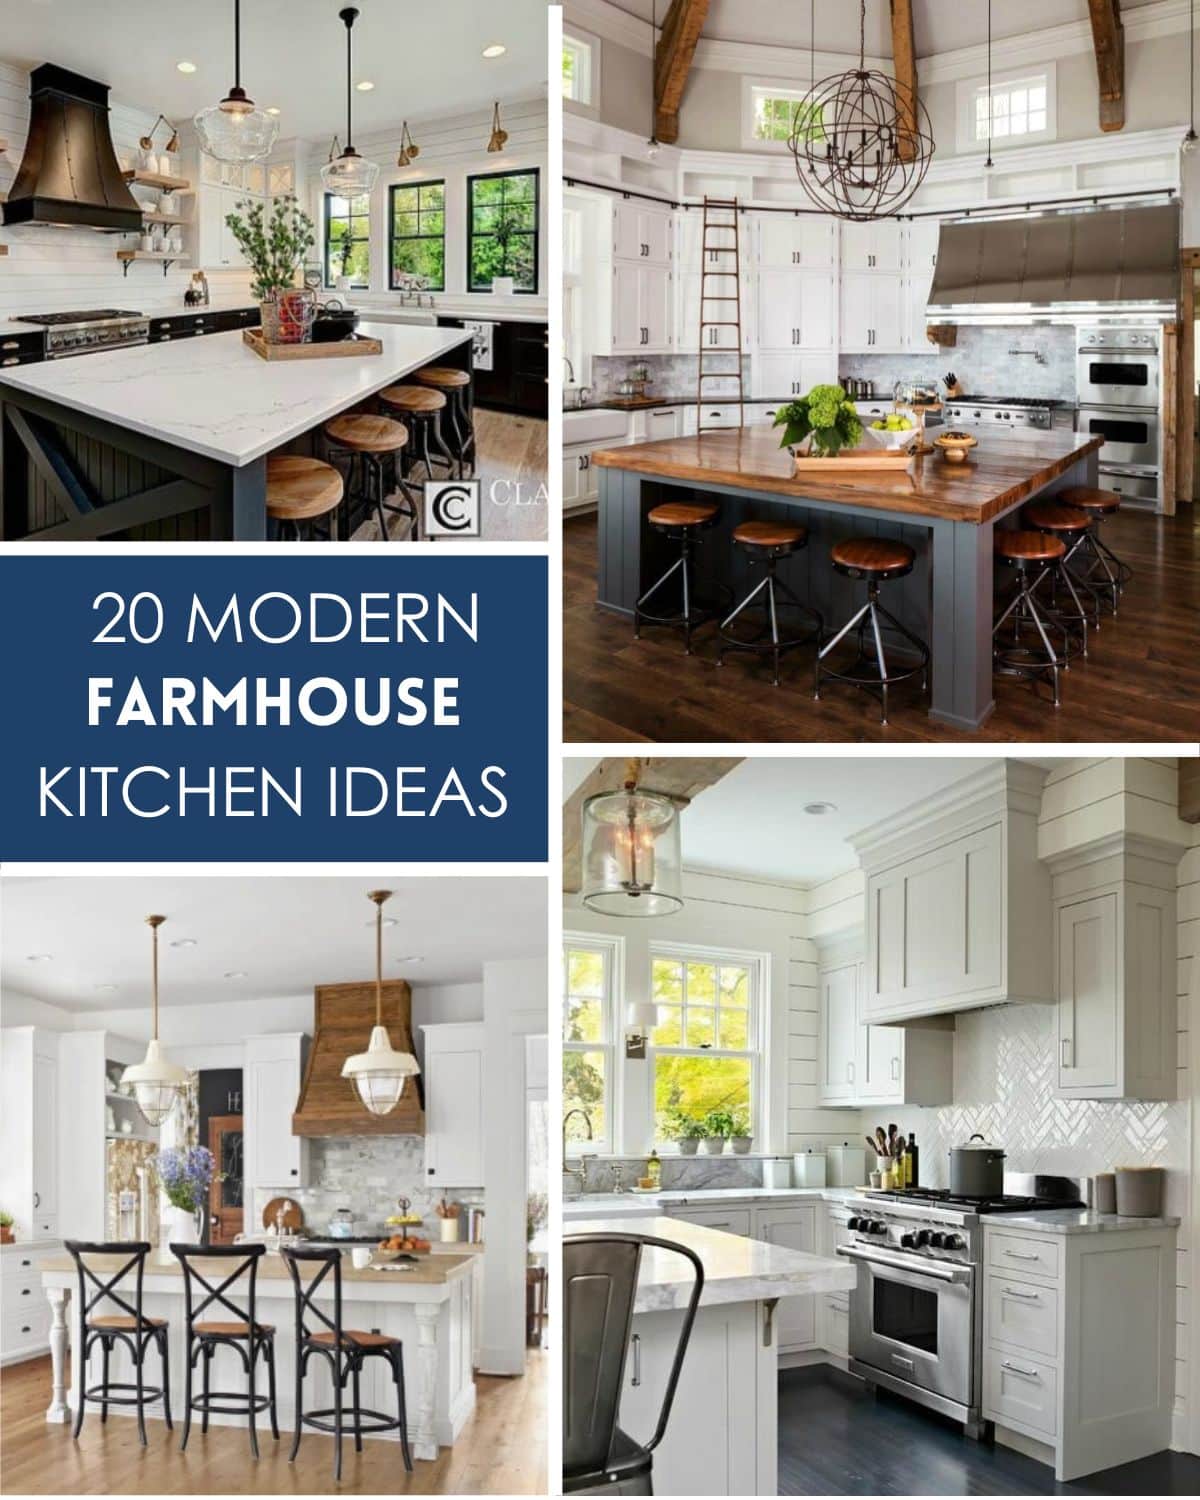 A collection of farmhouse kitchen ideas that shows rustic elements like beams, industrial lighting, wood barstools, and two toned cabinetry